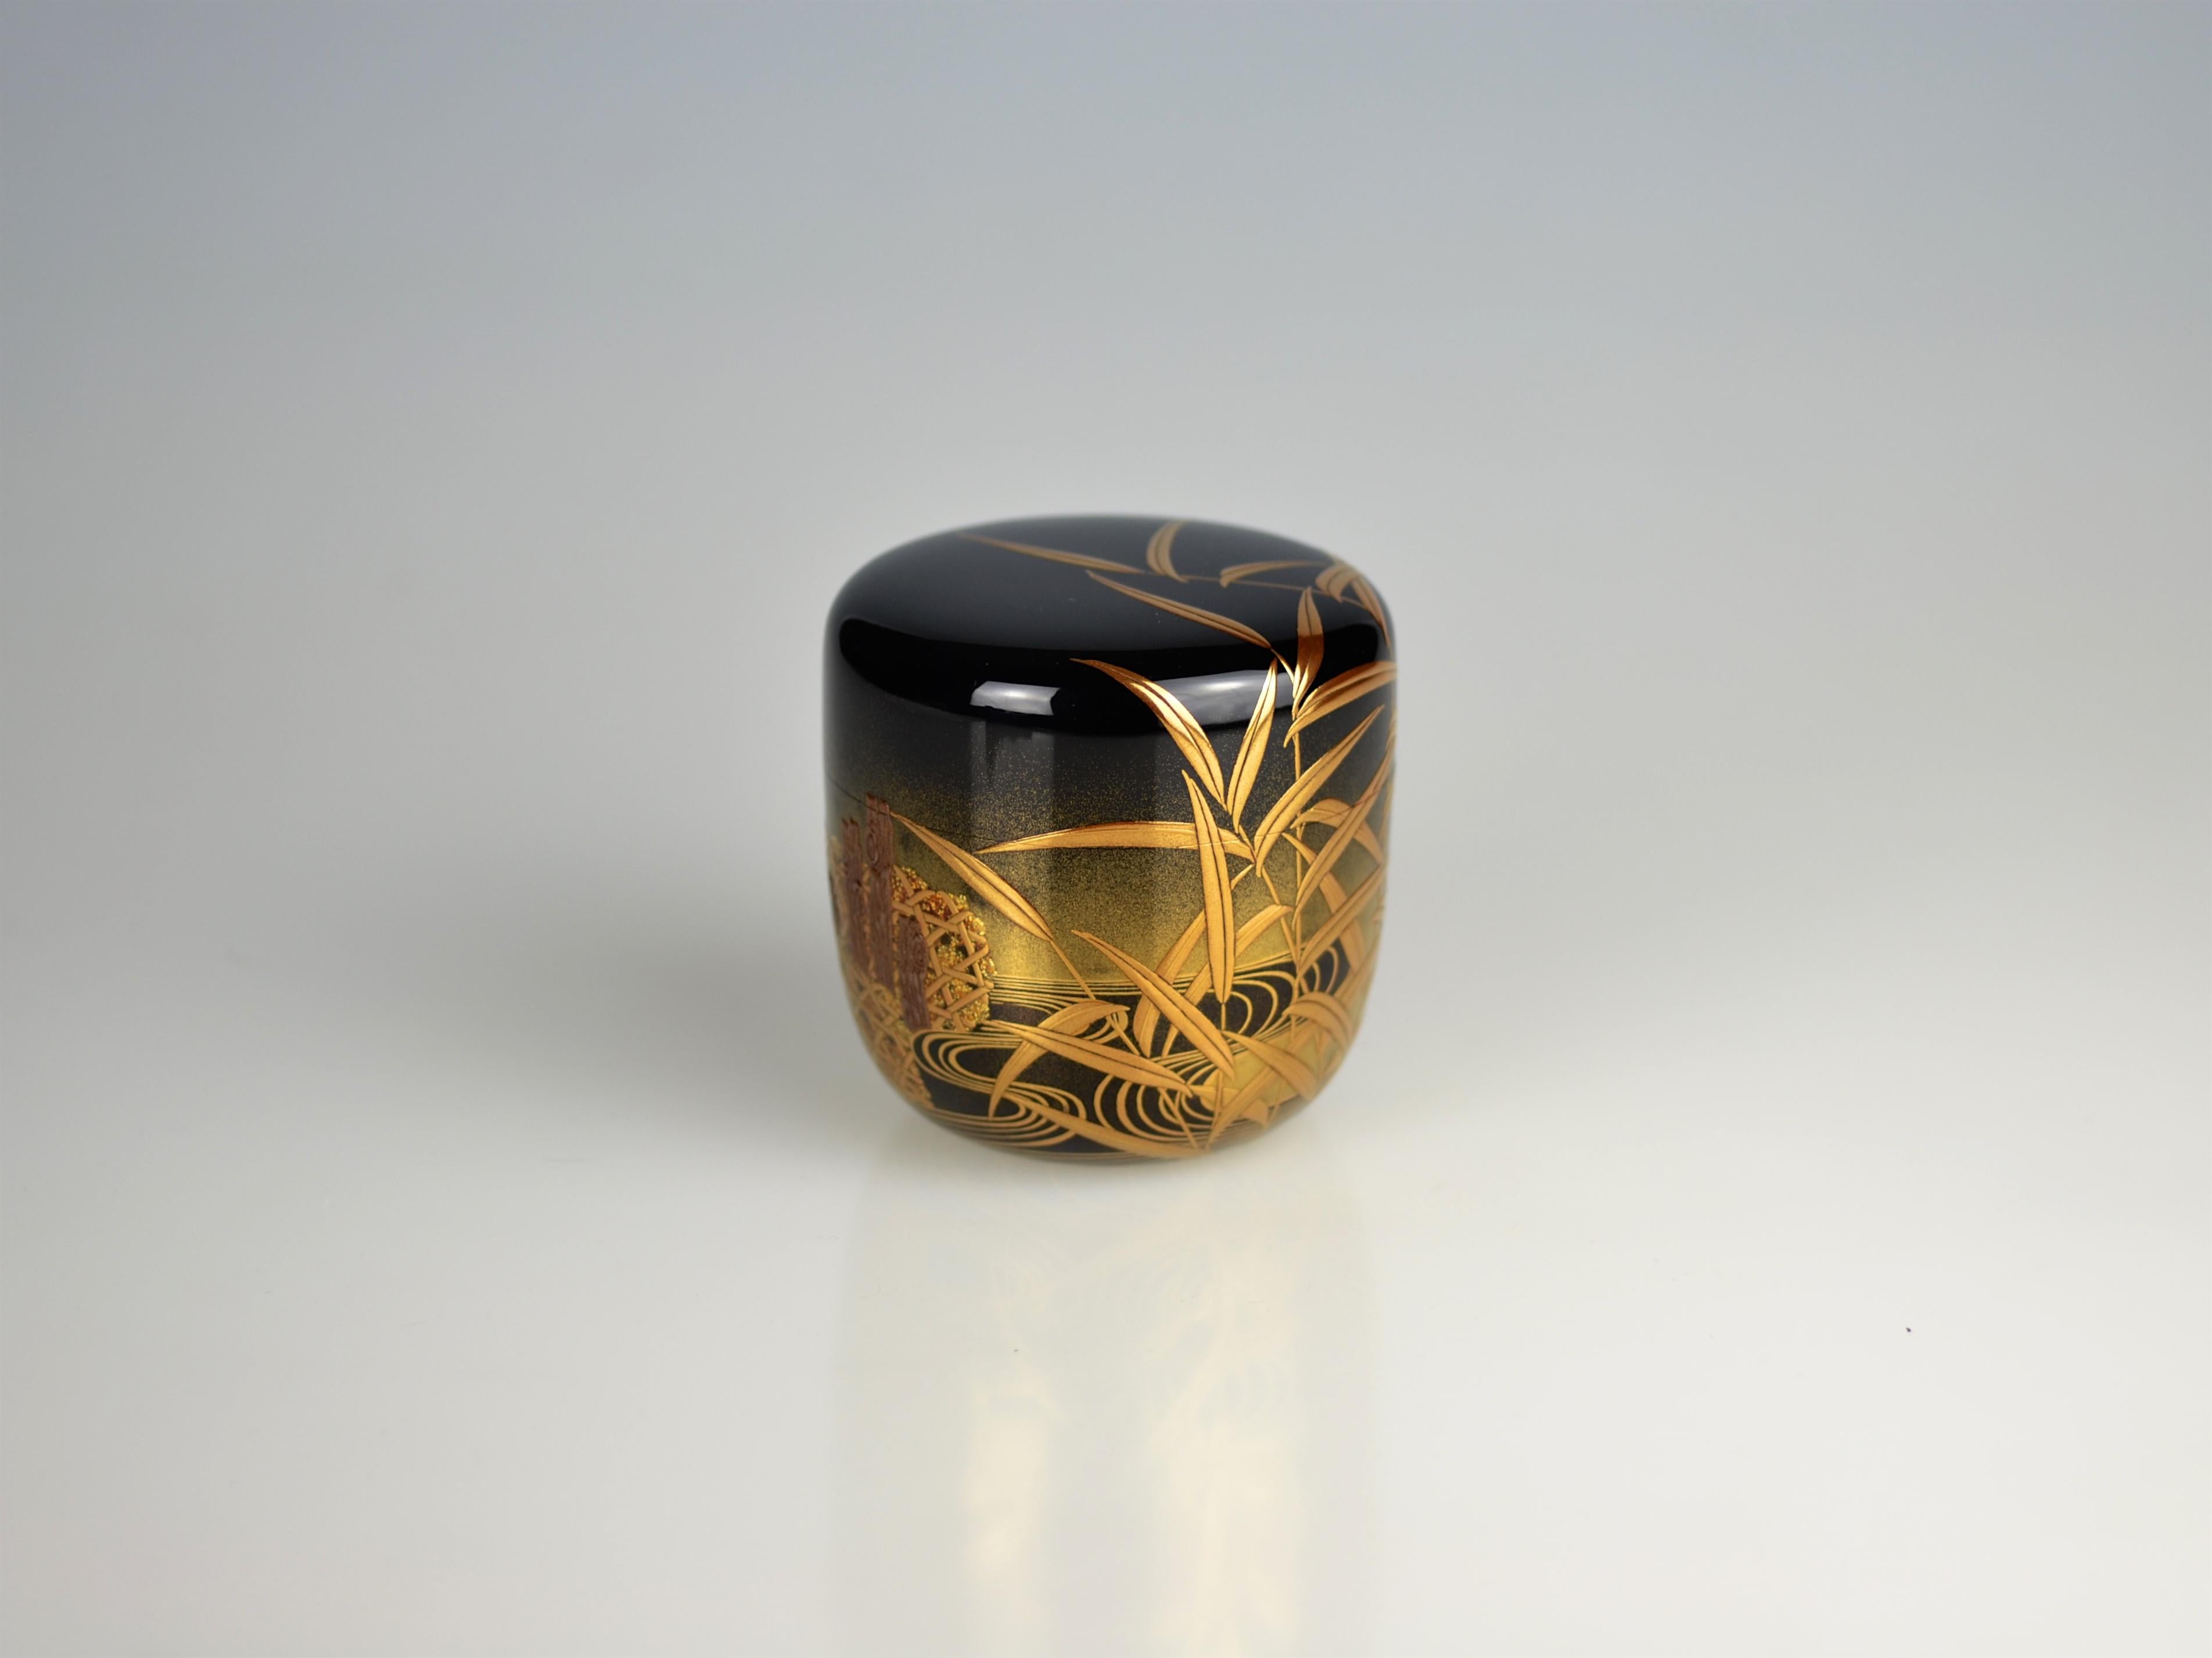 Fantastic maki-e tea caddy with a river scene showing reed and traditional stone baskets (Jap. jakago) in takamaki-e on a polished black lacquer ground with fading nashiji decoration (Jap. togidashi-e). The skillful use of golden applications and